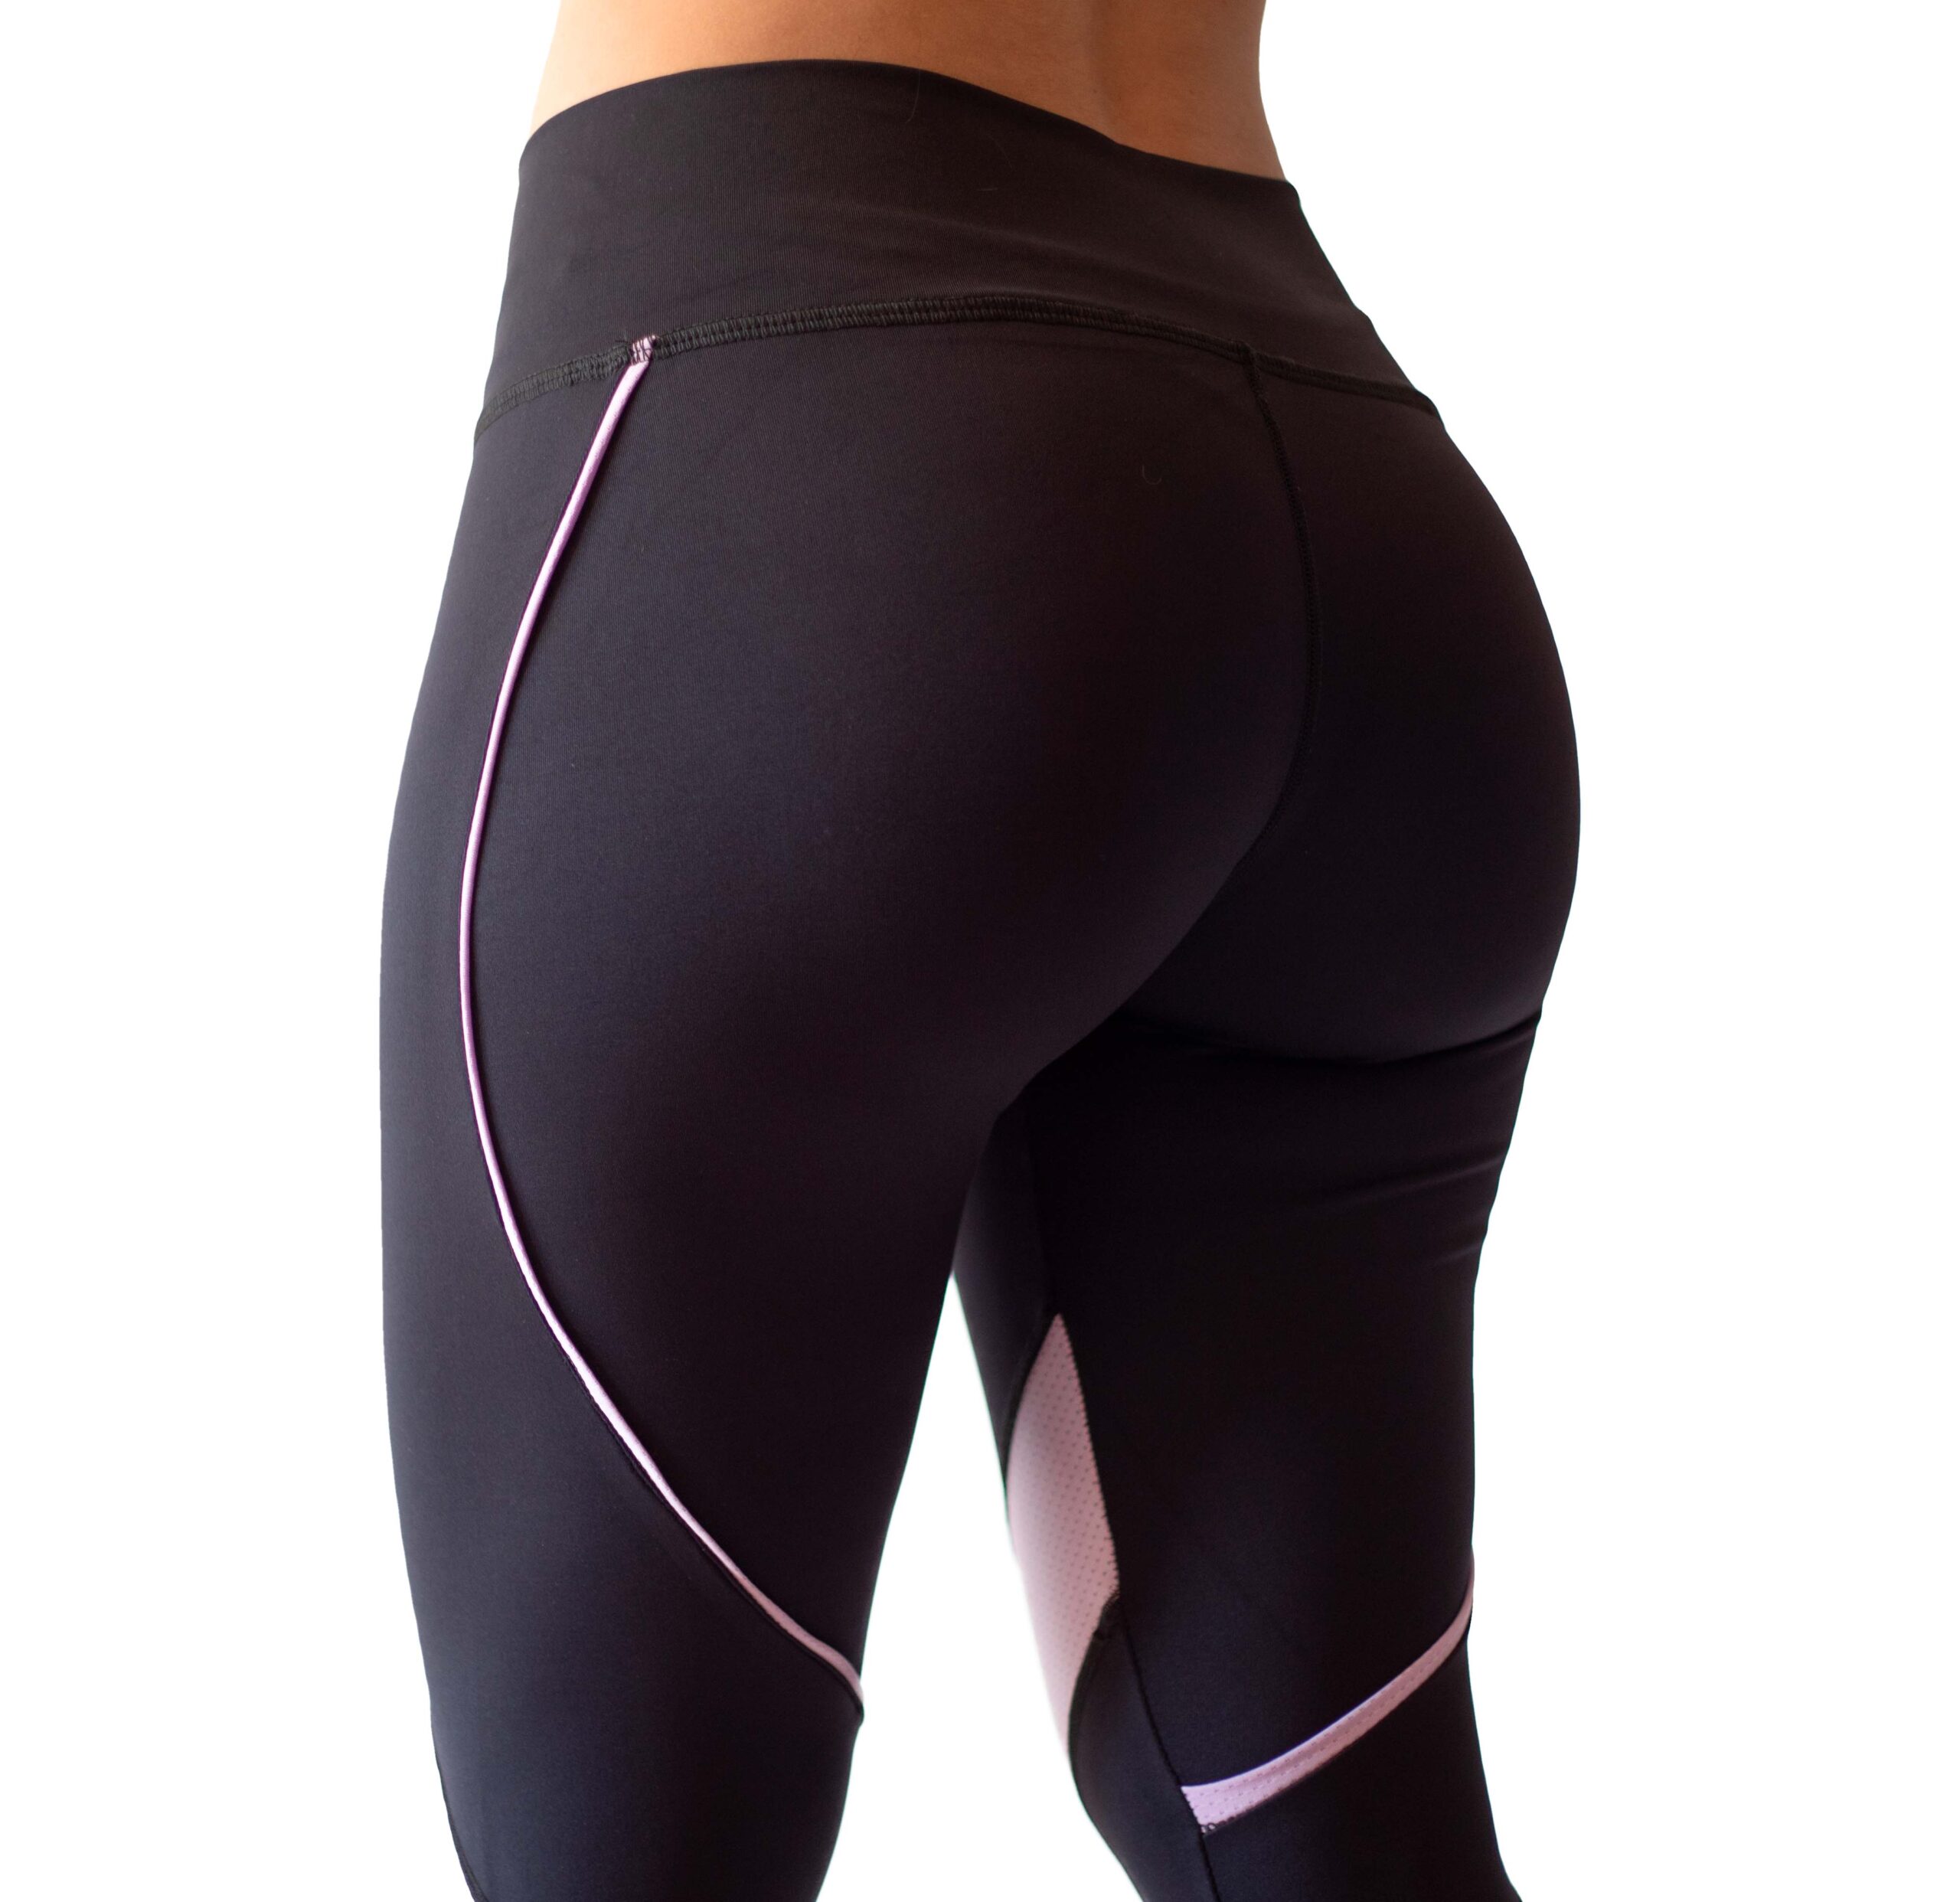 Super Soft Leggings For Women, High Waisted Tummy Control No See Through  Workout Yoga Running Tights, Women's Activewear